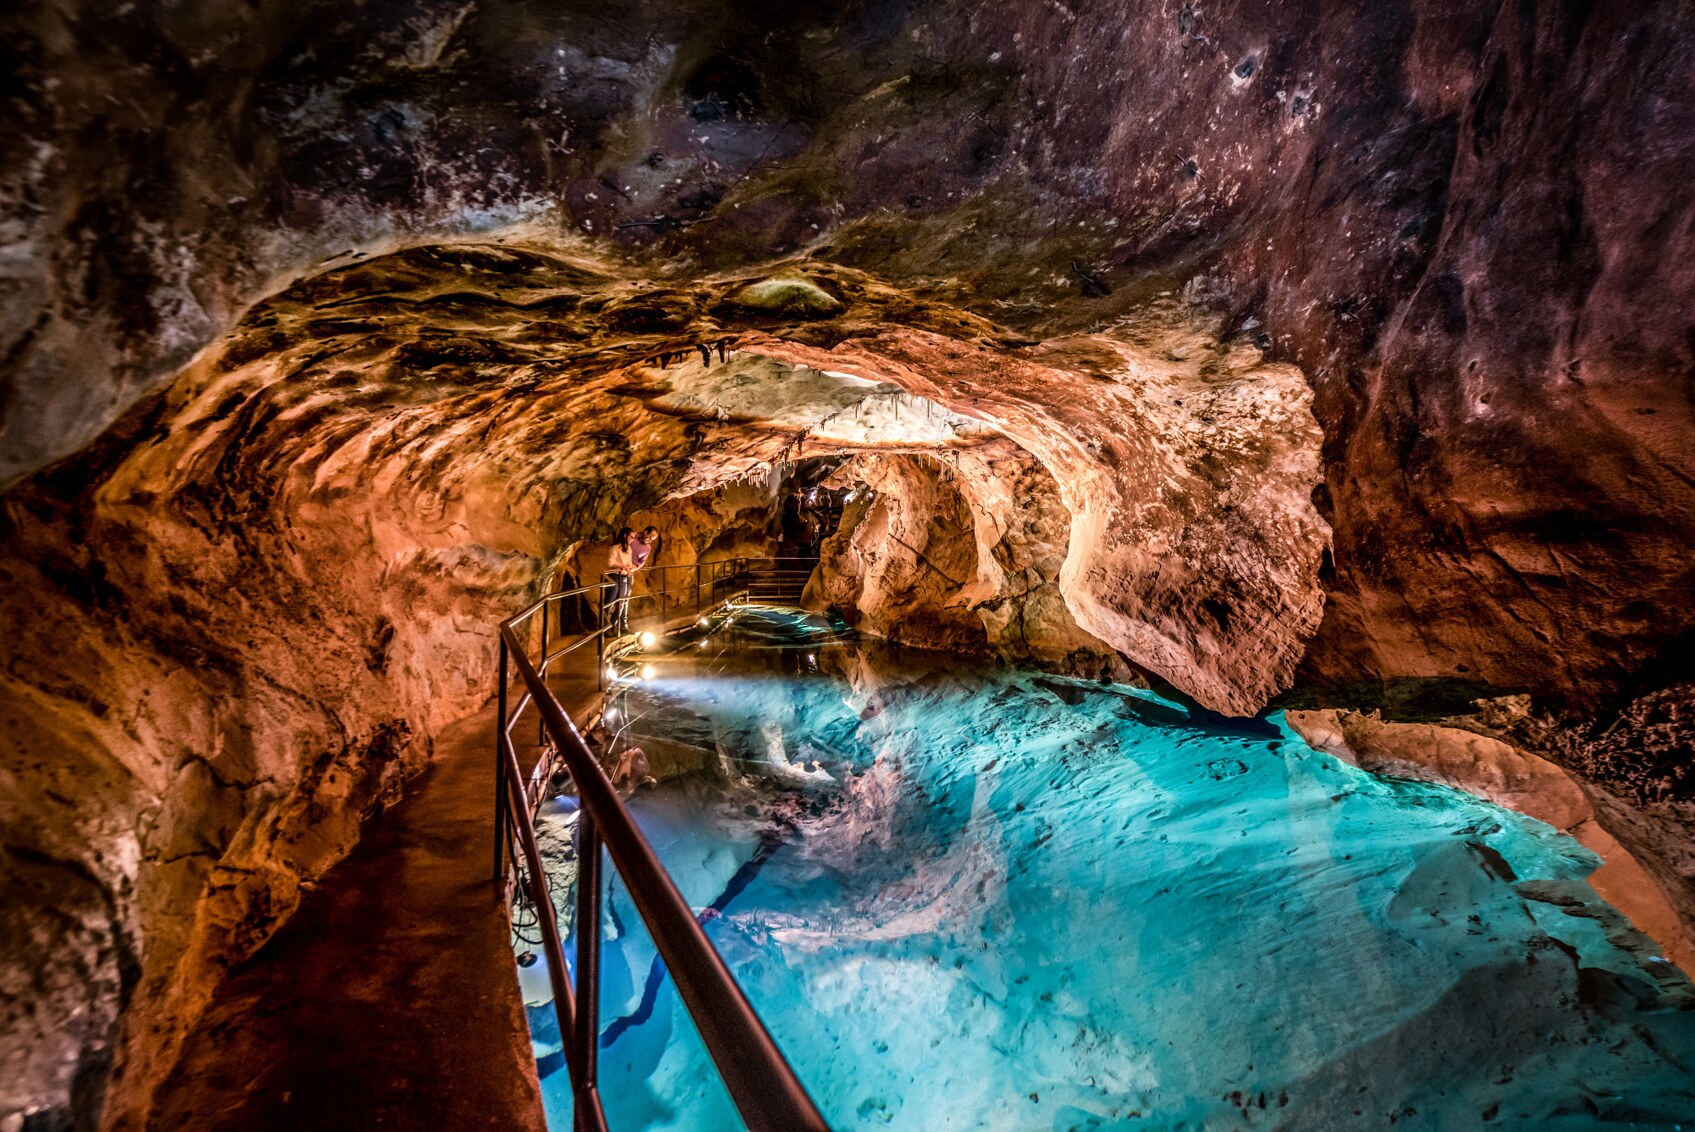 An interior photograph of one of the main caverns at NSW stunning Jenolan Caves